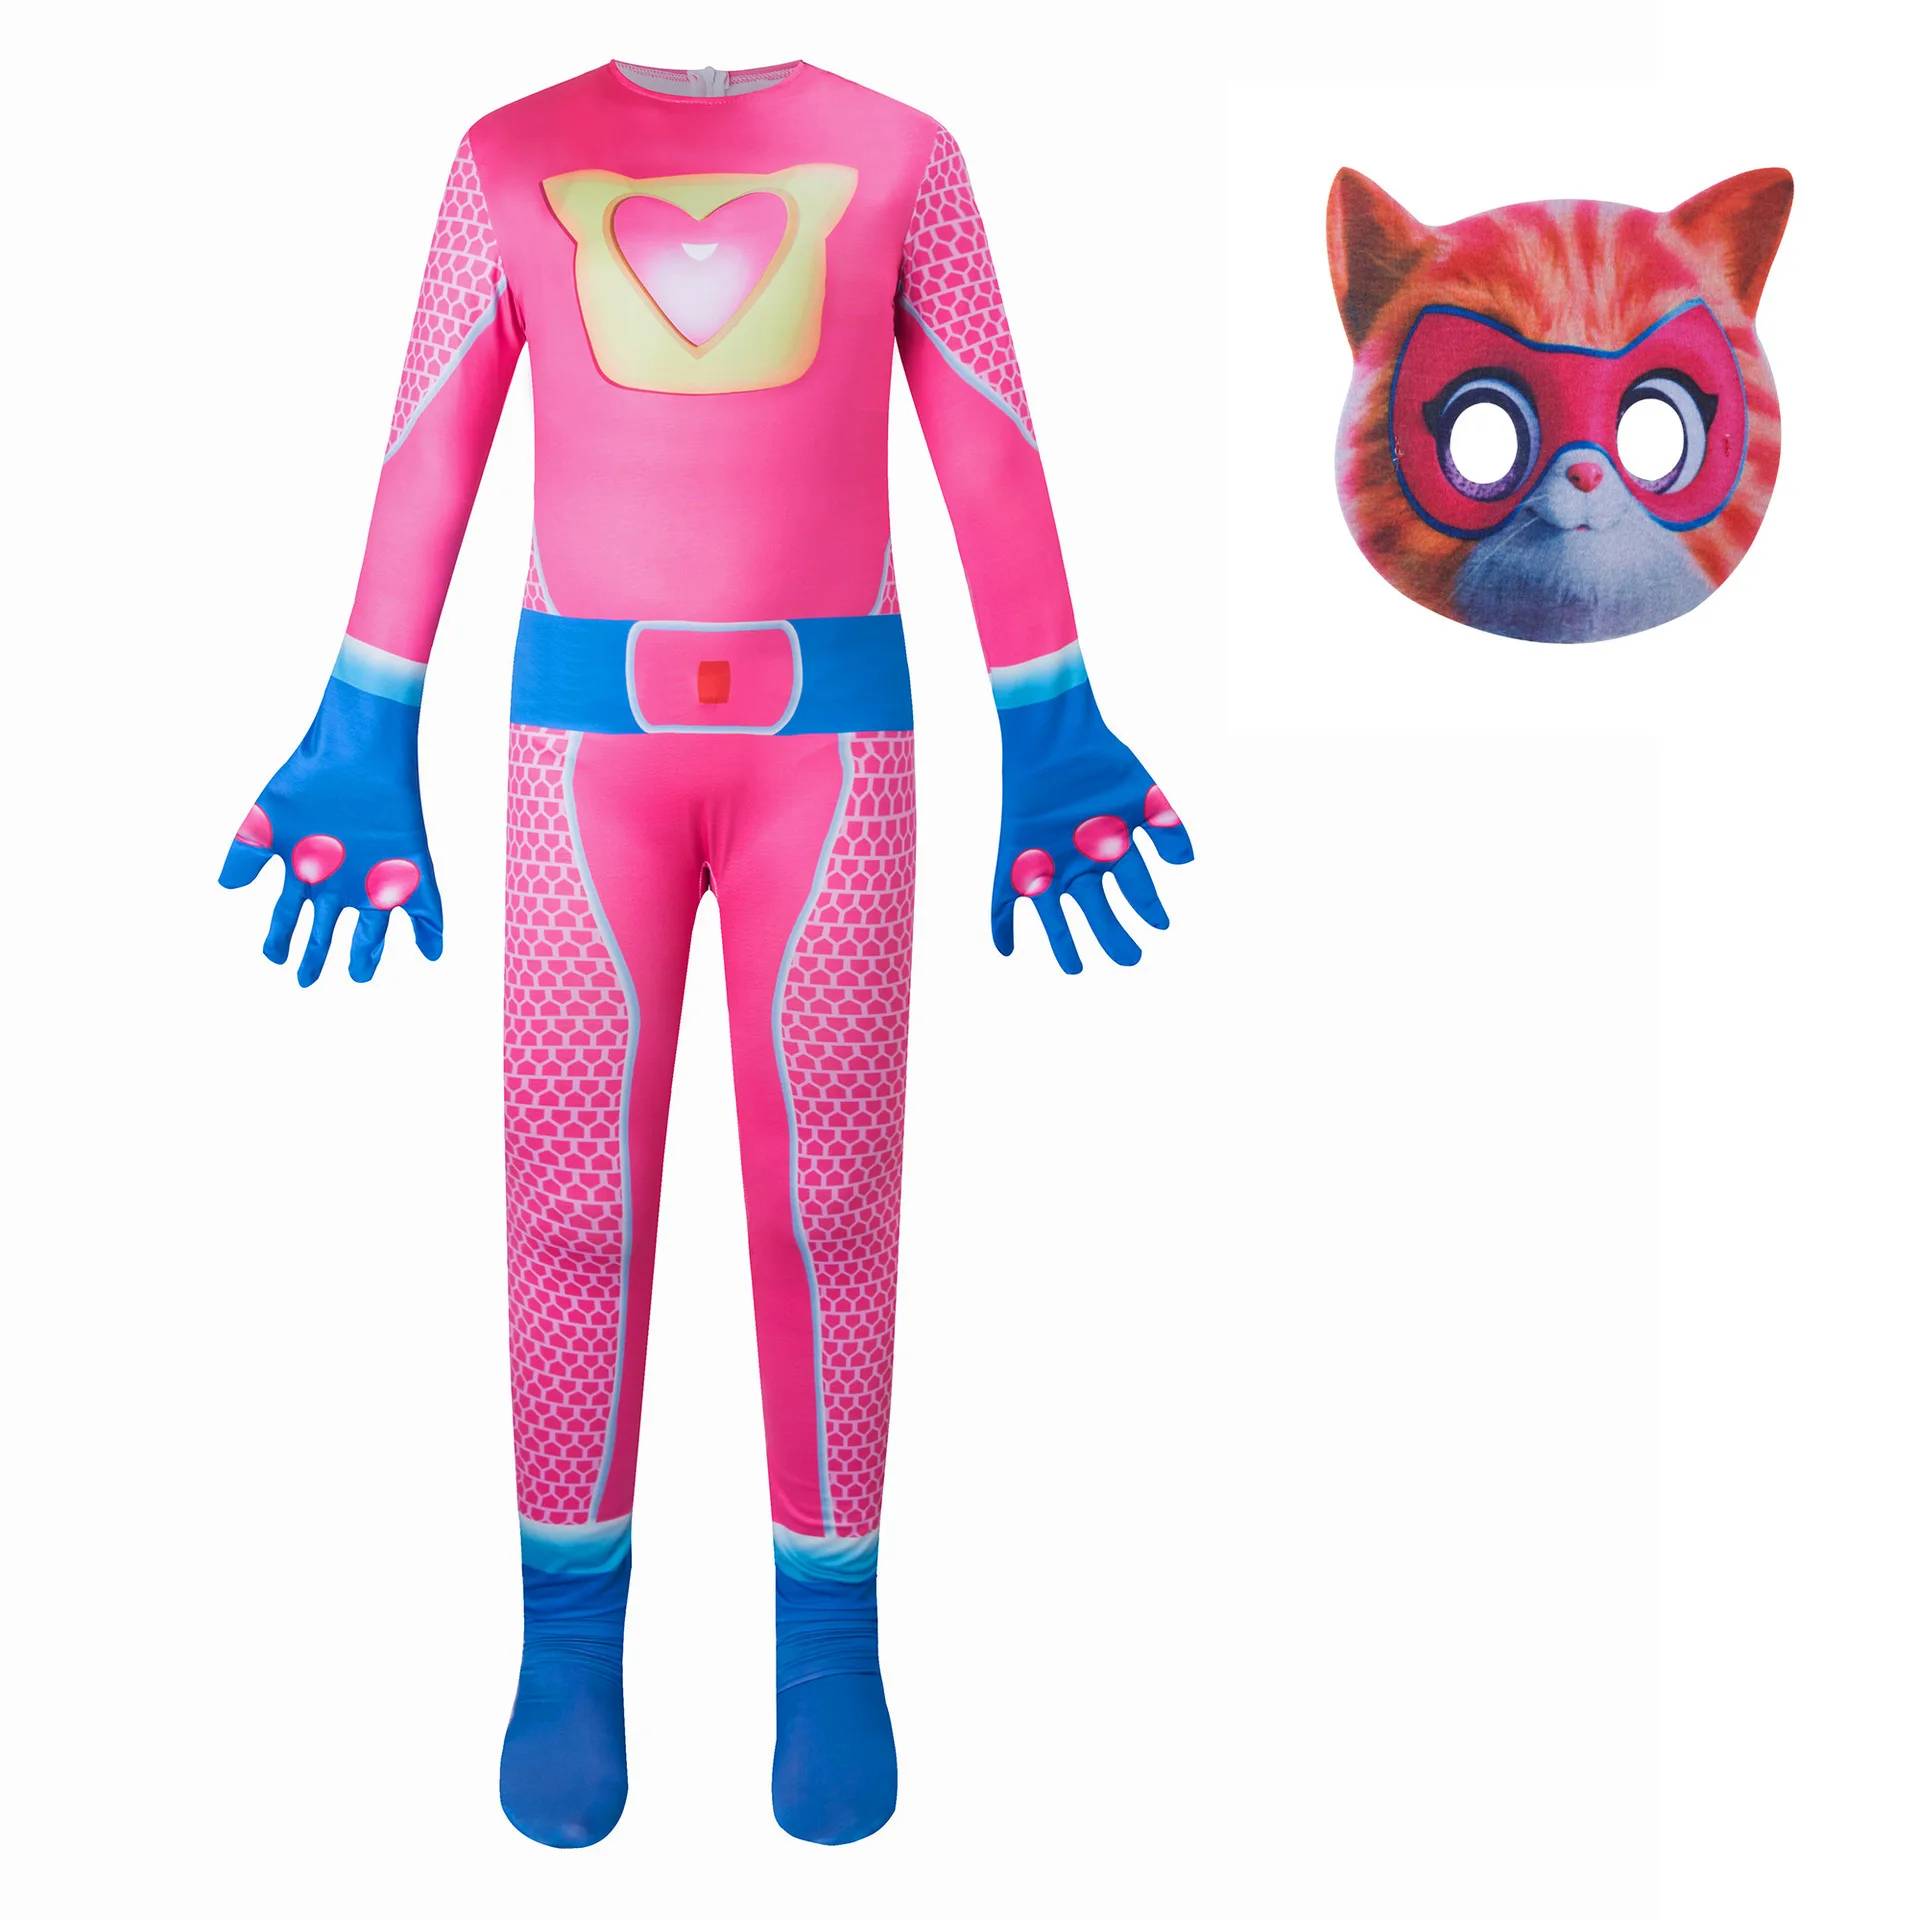 

SuperKitties jumpsuit, tight fitting Halloween fun costume, stage performance costumes, super cats